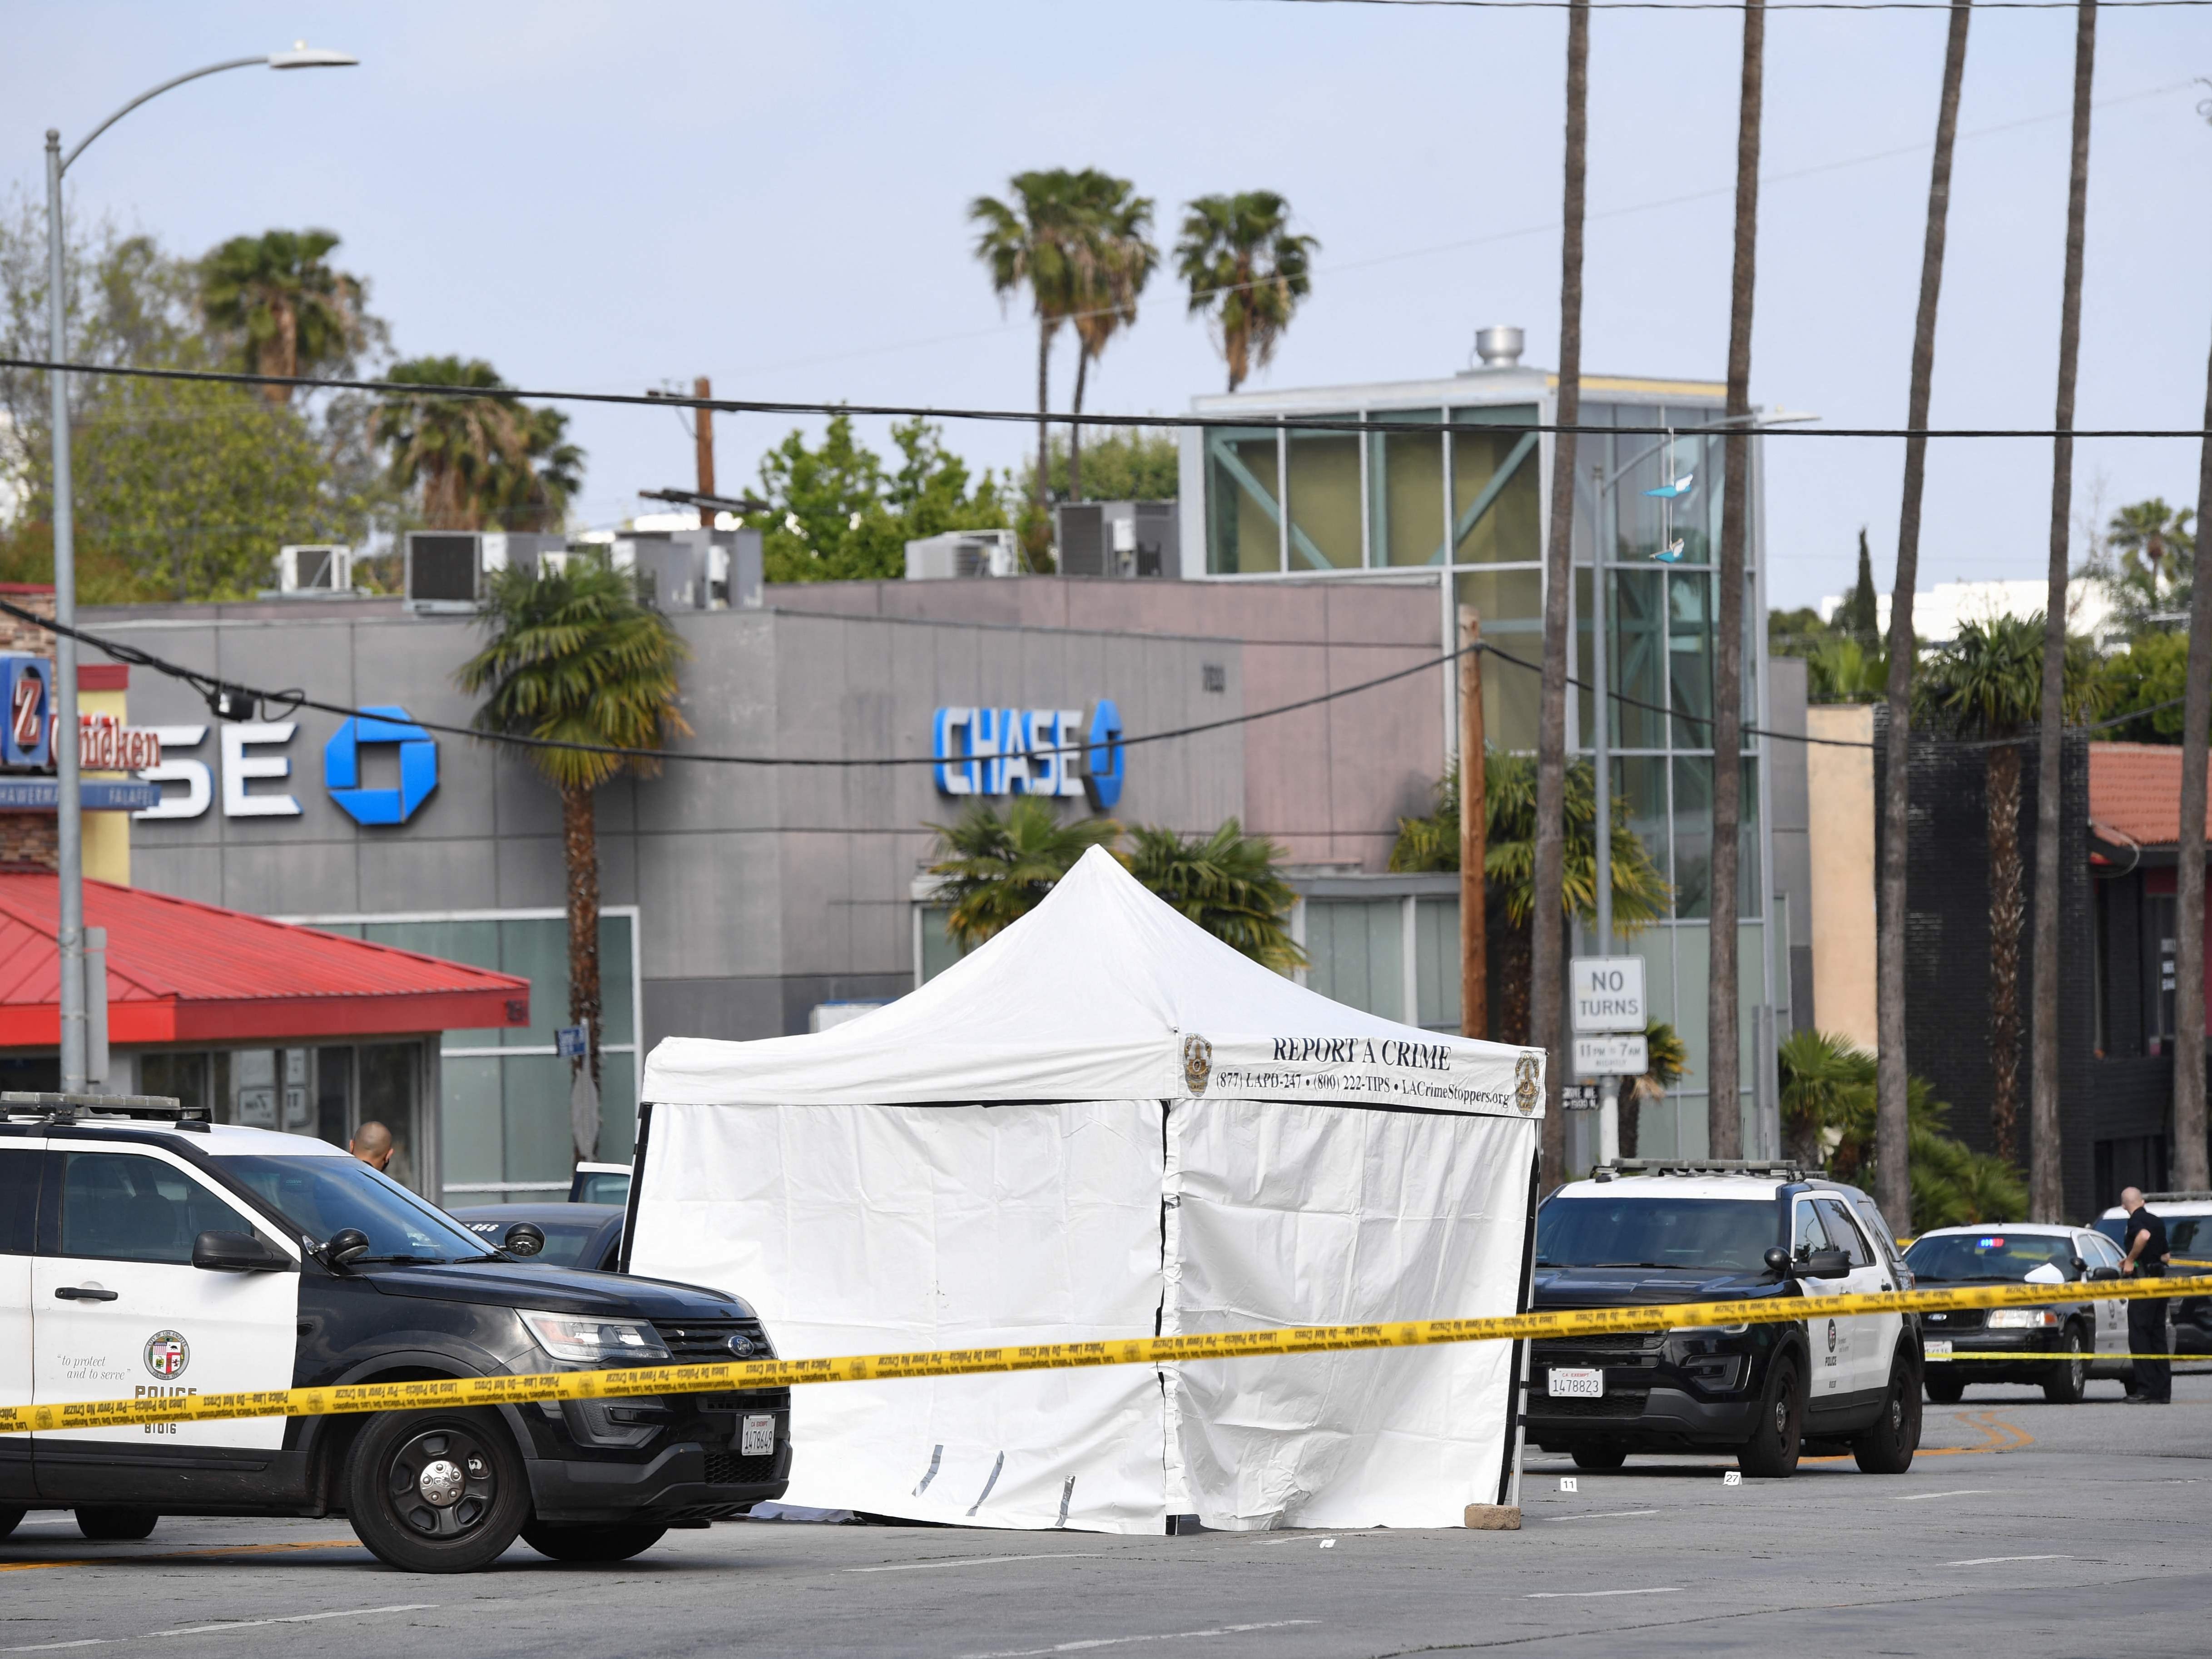 LAPD police cars block the corner of Fairfax Avenue and Sunset Boulevard where a body covered in a white sheet lies under a tent in Los Angeles on 24 April, 2021